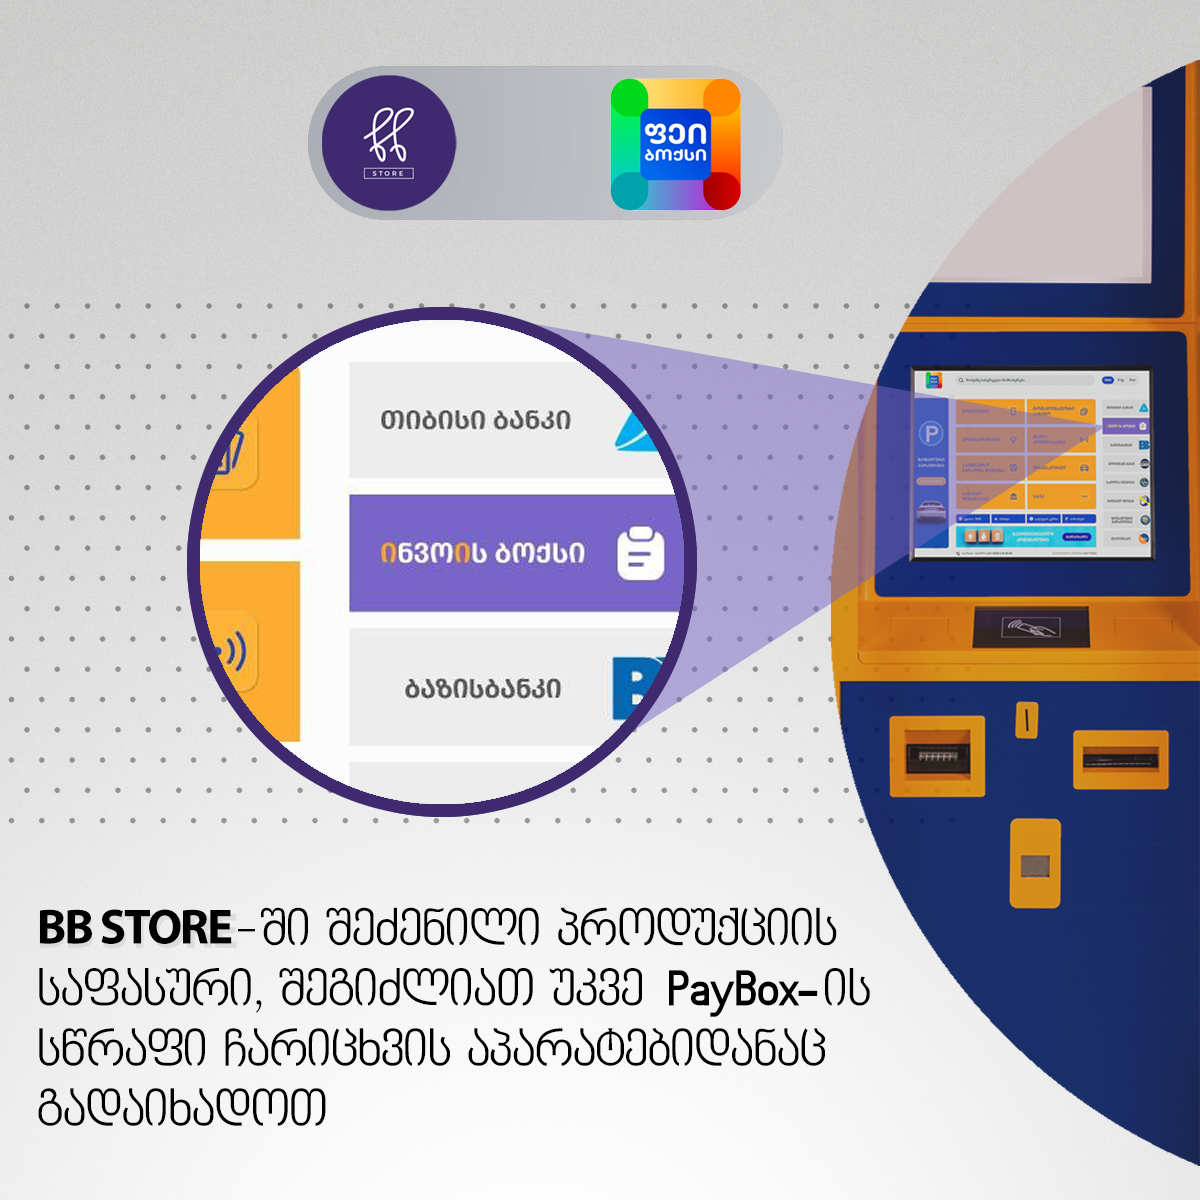 BB Store is a partner company of Pay Box